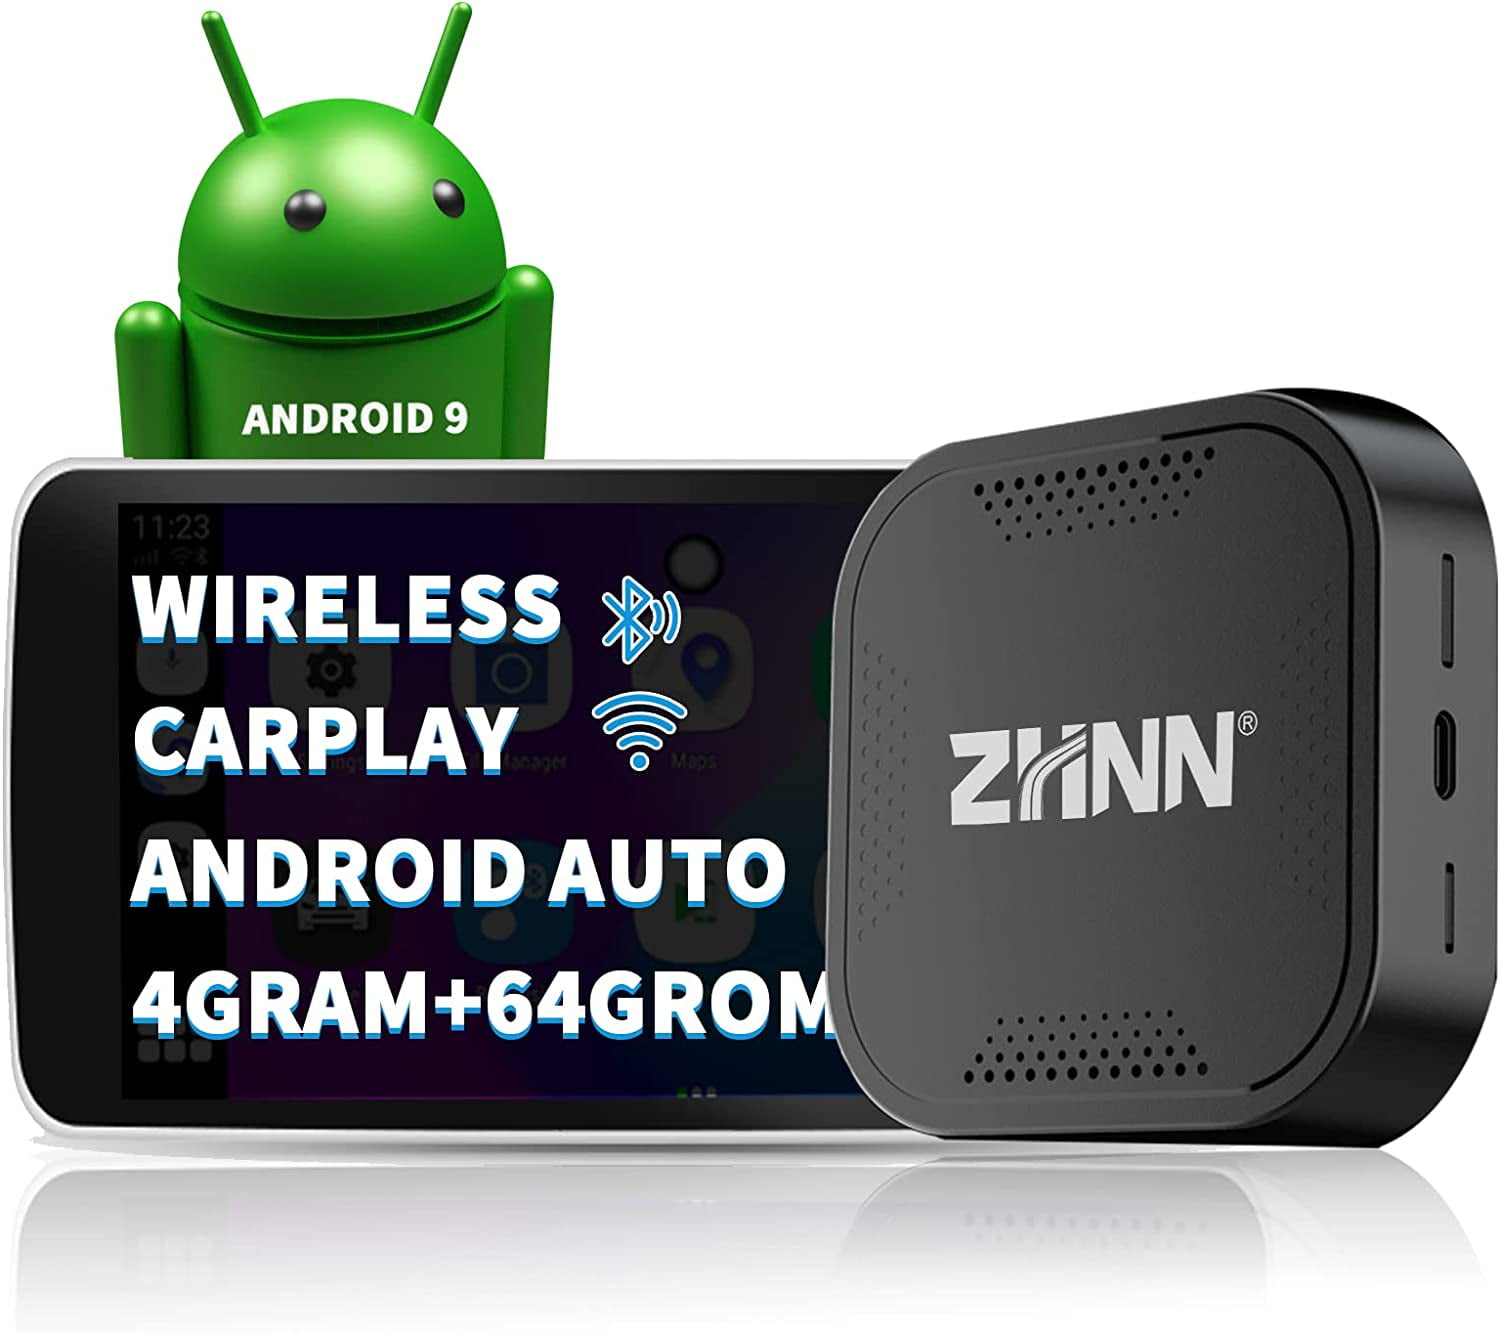 ZHNN Android 9 System, The Magic Box Carplay Streaming to Your Car